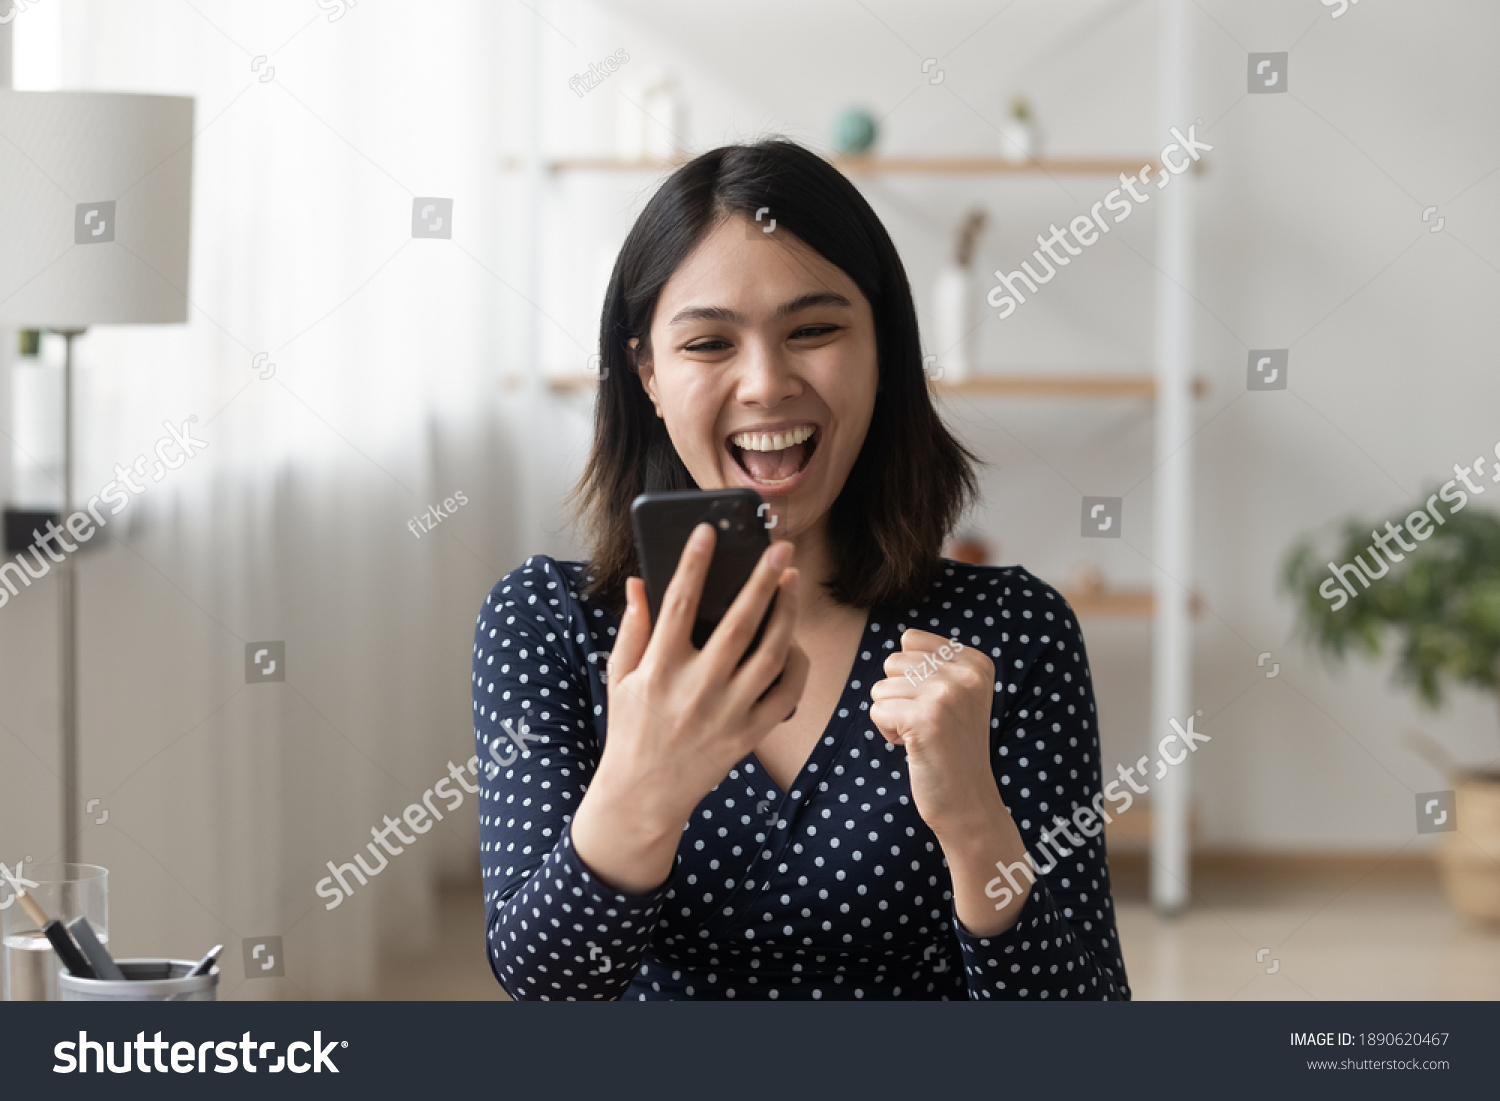 Emotional happy millennial korean ethnicity woman looking at smartphone screen, reading message with unbelievable amazing news, celebrating getting online shopping prize or lottery win notification. #1890620467